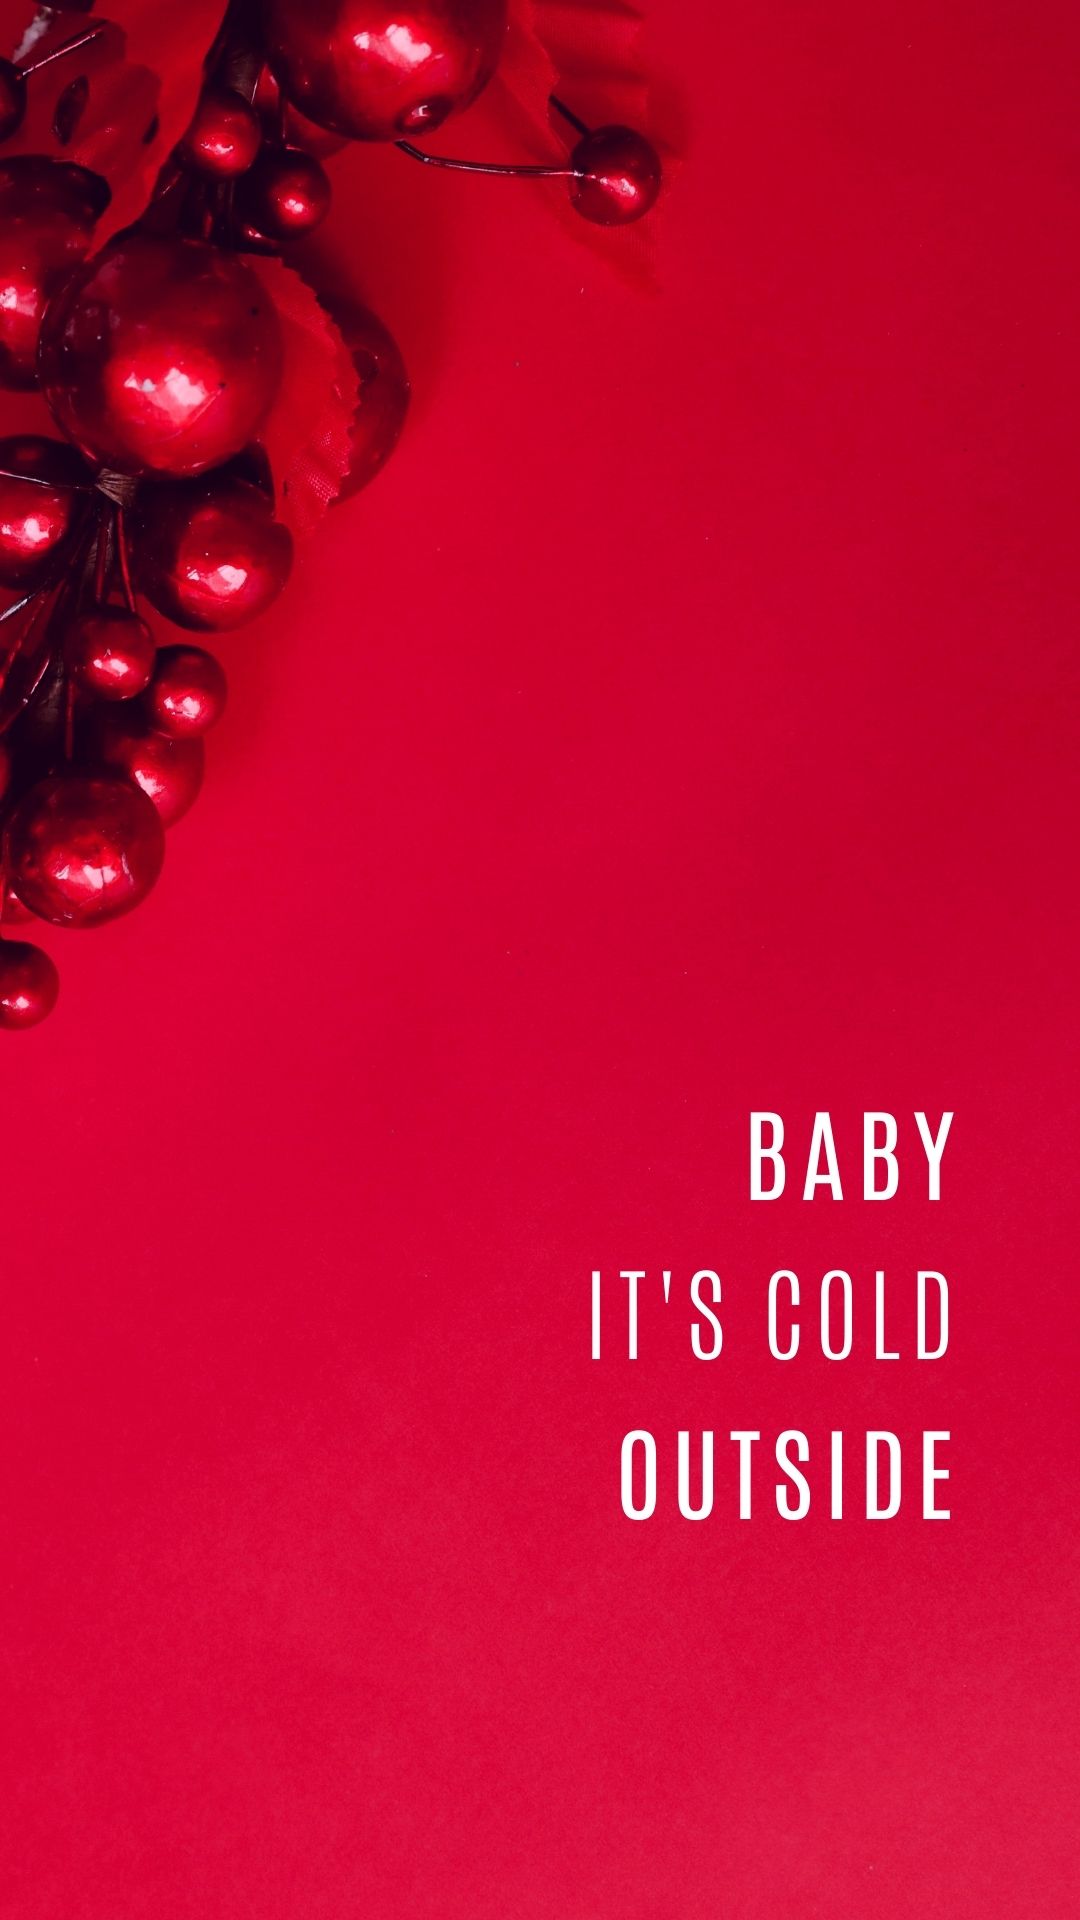 Baby It's Cold Outside Iphone Wallpaper BackGround for Christmas